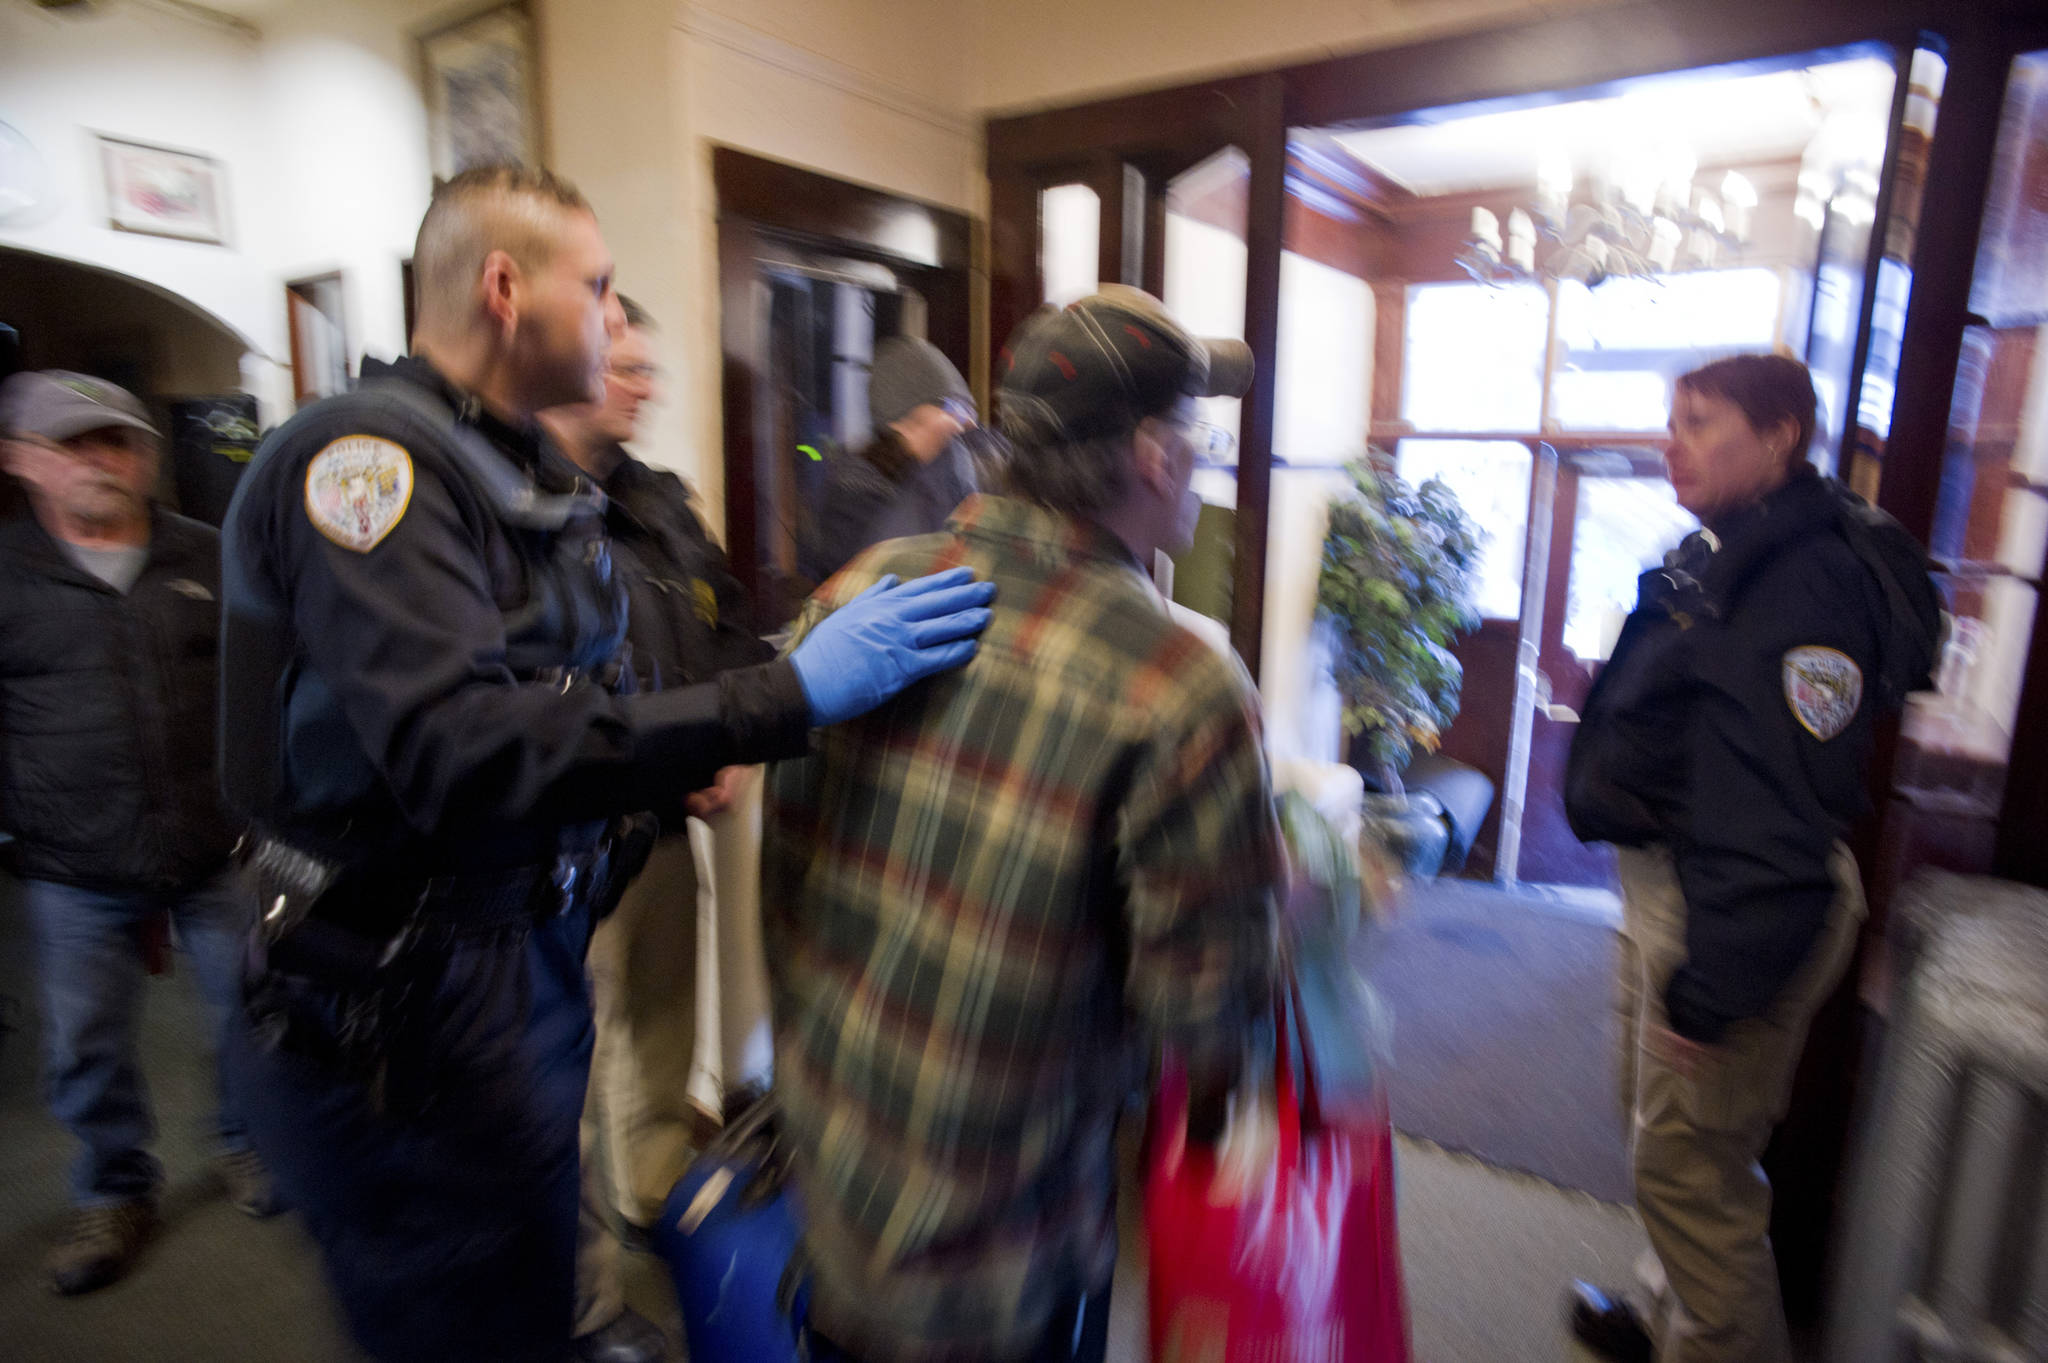 Juneau police officers escort a tenant out of the Bergmann Hotel as the city closed the building for health and safety reasons on Friday. (Michael Penn | Juneau Empire)